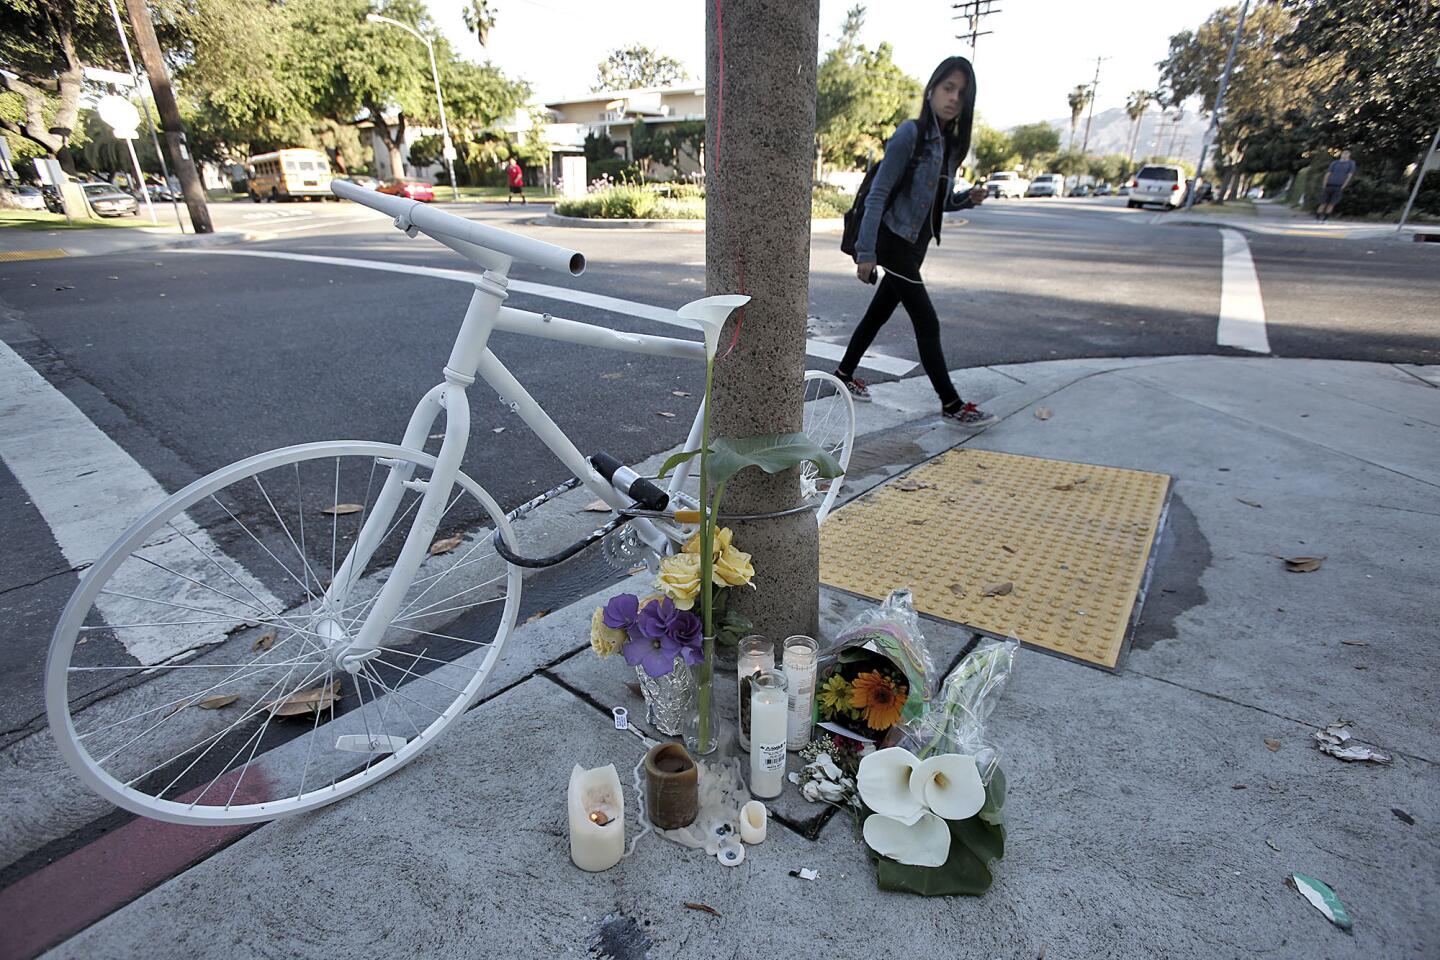 A Roosevelt Middle School student passes by memorial in memory of fellow student Jonathan Hernandez at Columbus Ave. and Riverdale Dr. in Glendale on Friday, May 3, 2013. Hernandez was hit by a school bus while he was going home on his bicycle the day before.